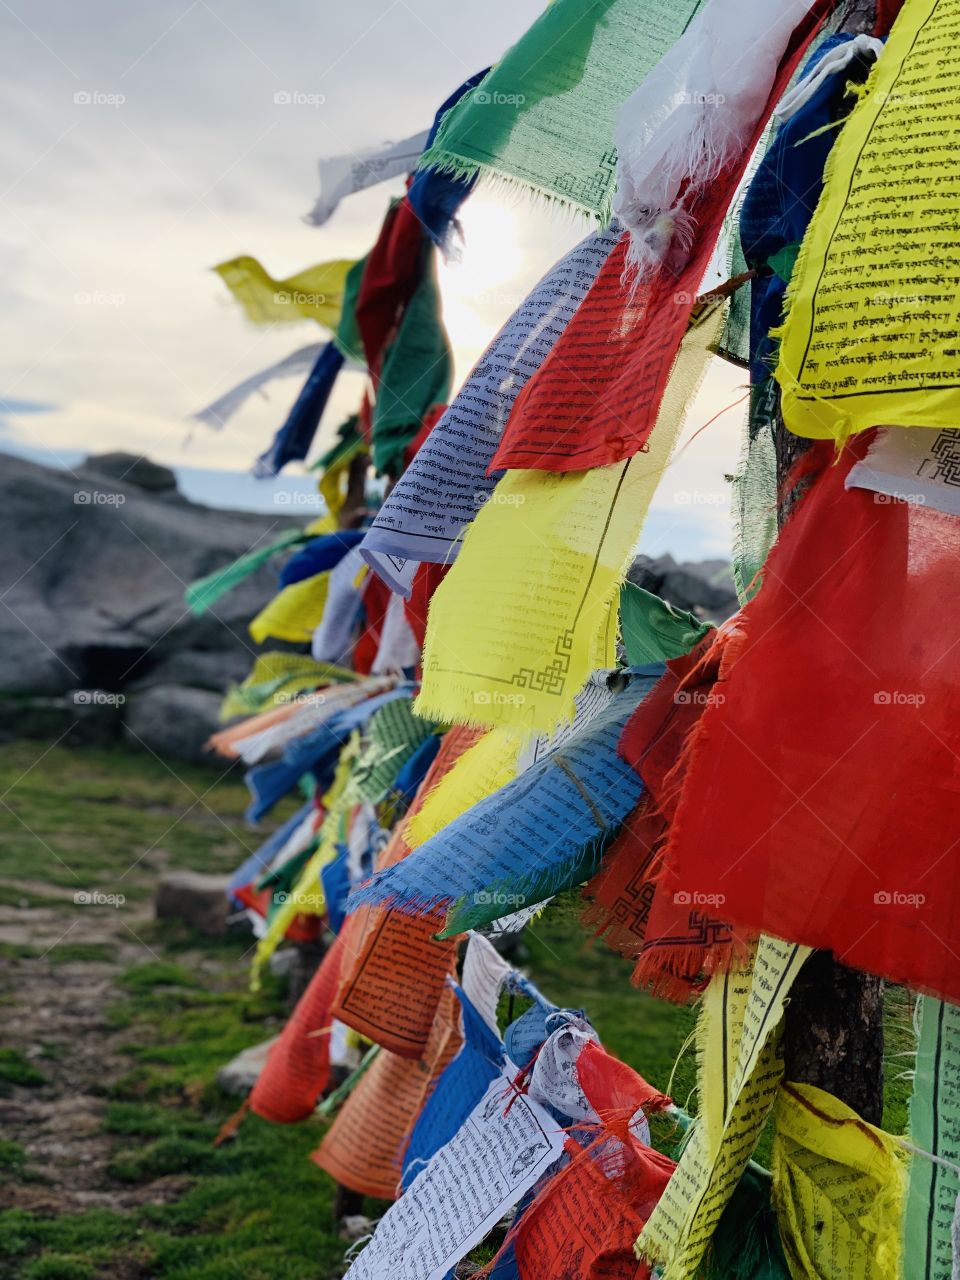 These colourful prayer flags